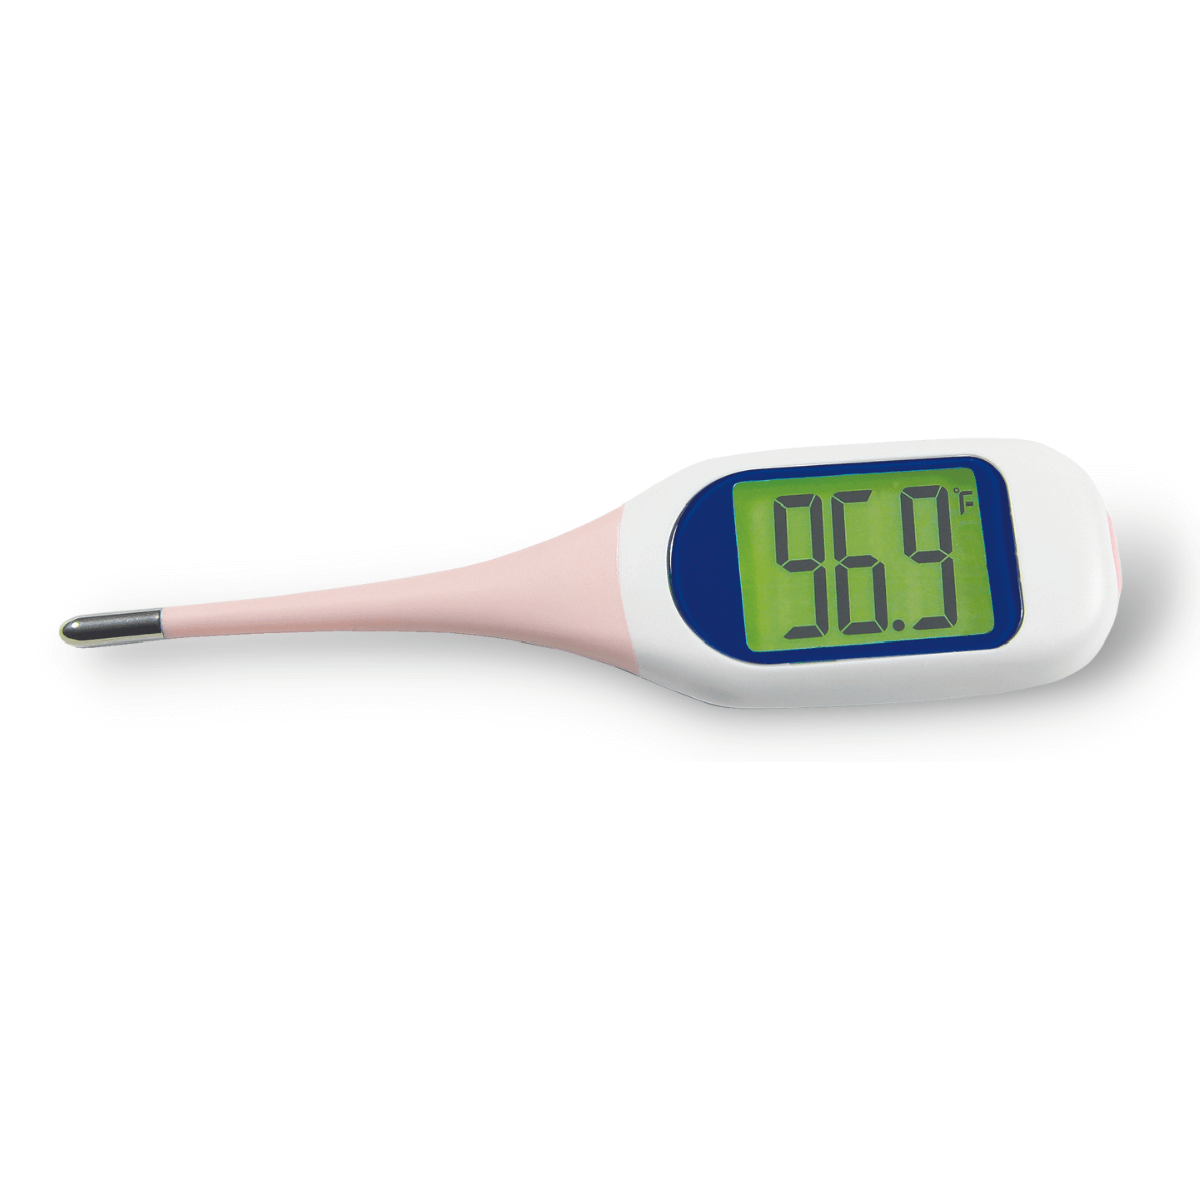 https://carroll.org/wp-content/uploads/2021/07/Talking-Oral-Thermometer.png